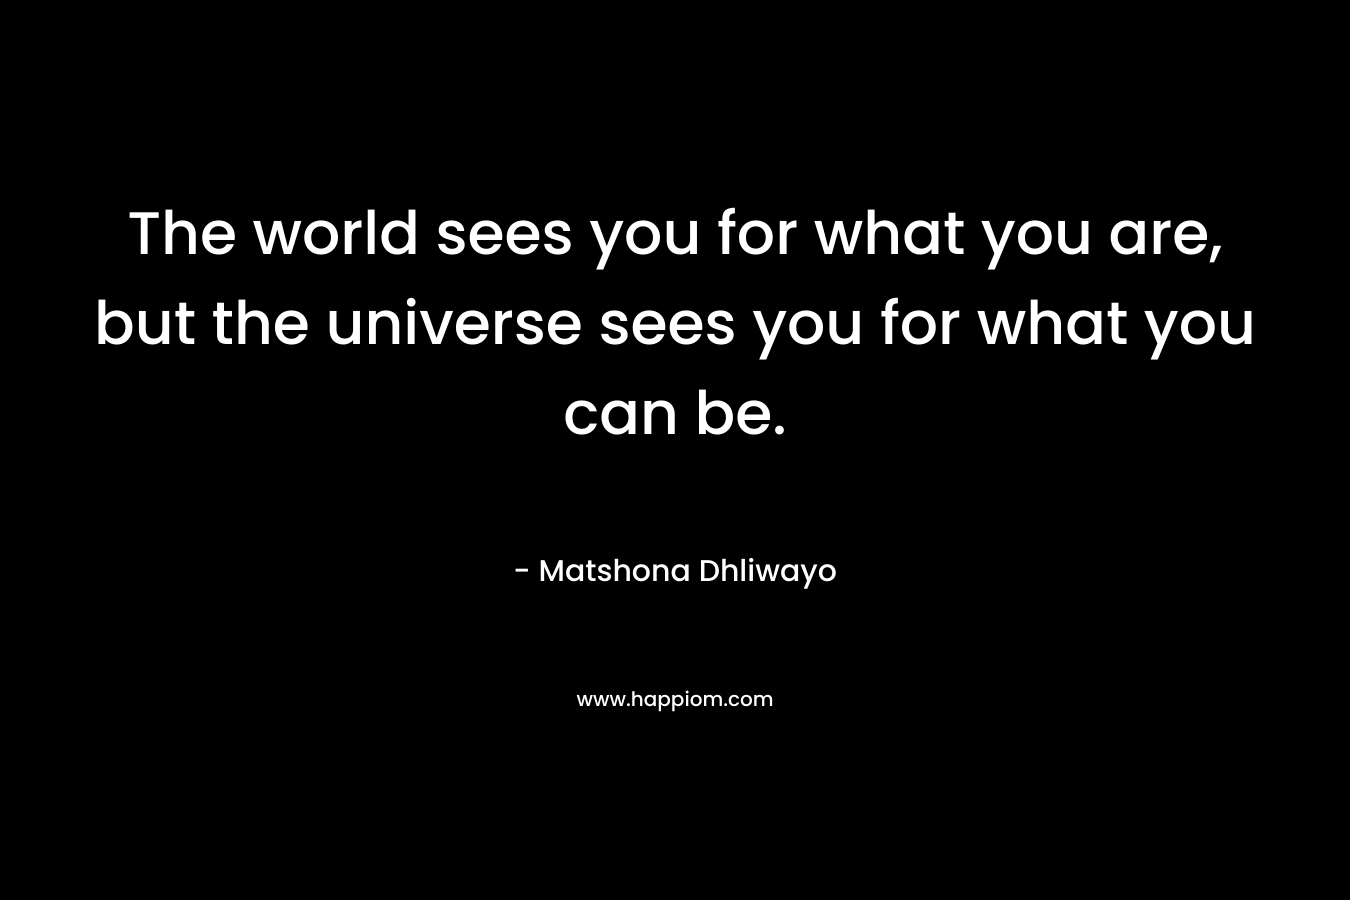 The world sees you for what you are, but the universe sees you for what you can be.